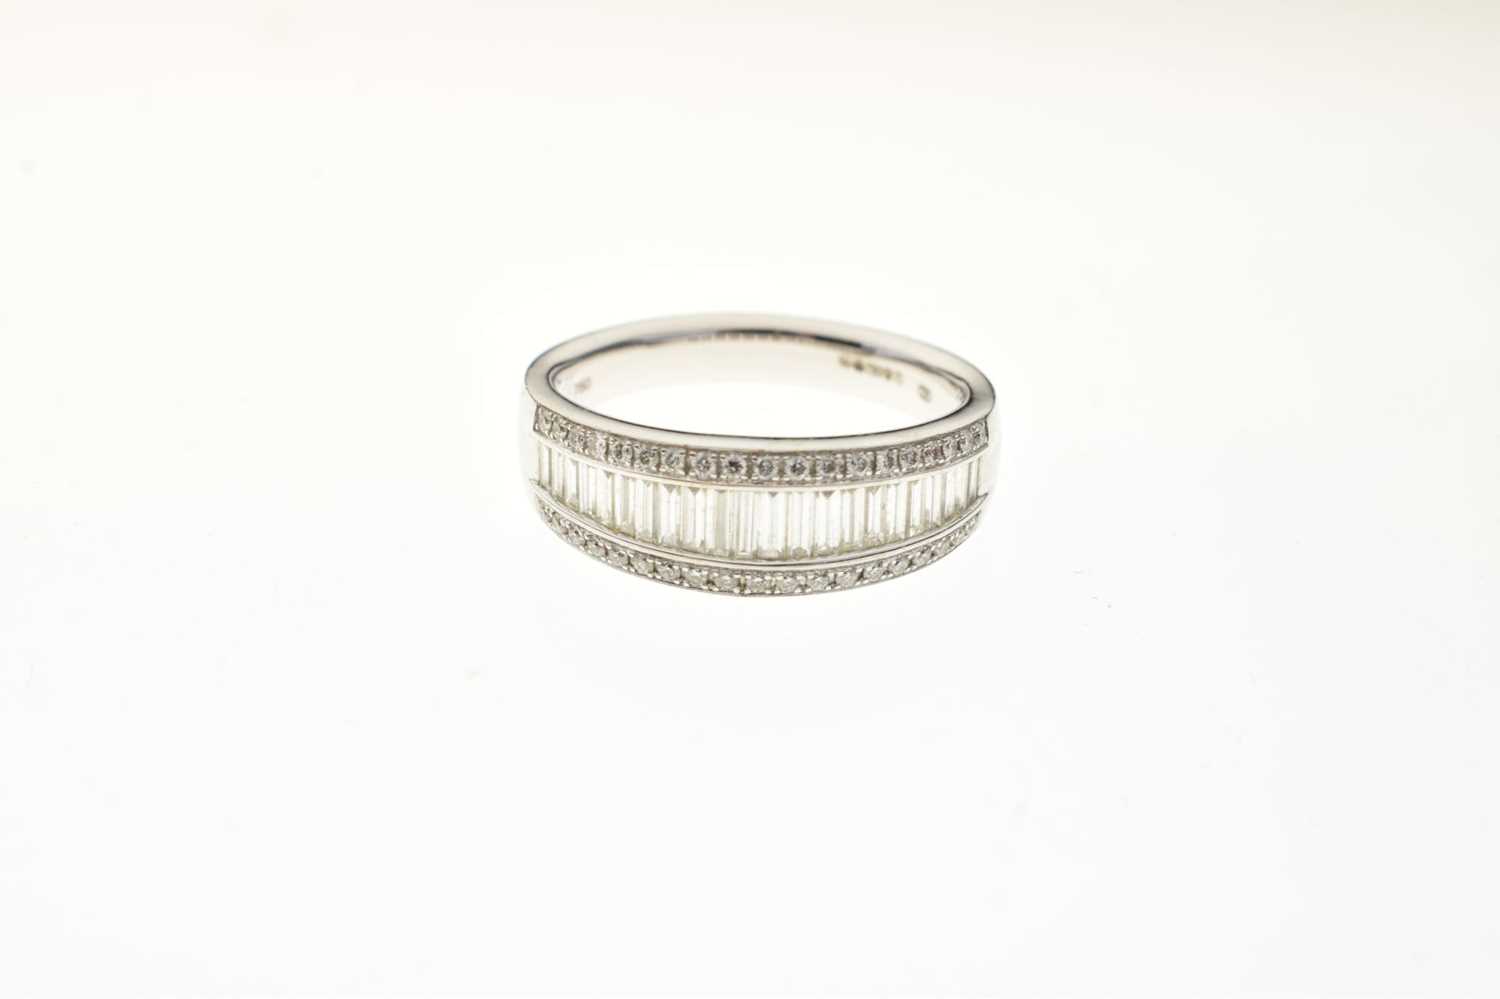 18ct white gold, baguette and brilliant cut diamond ring - Image 6 of 6